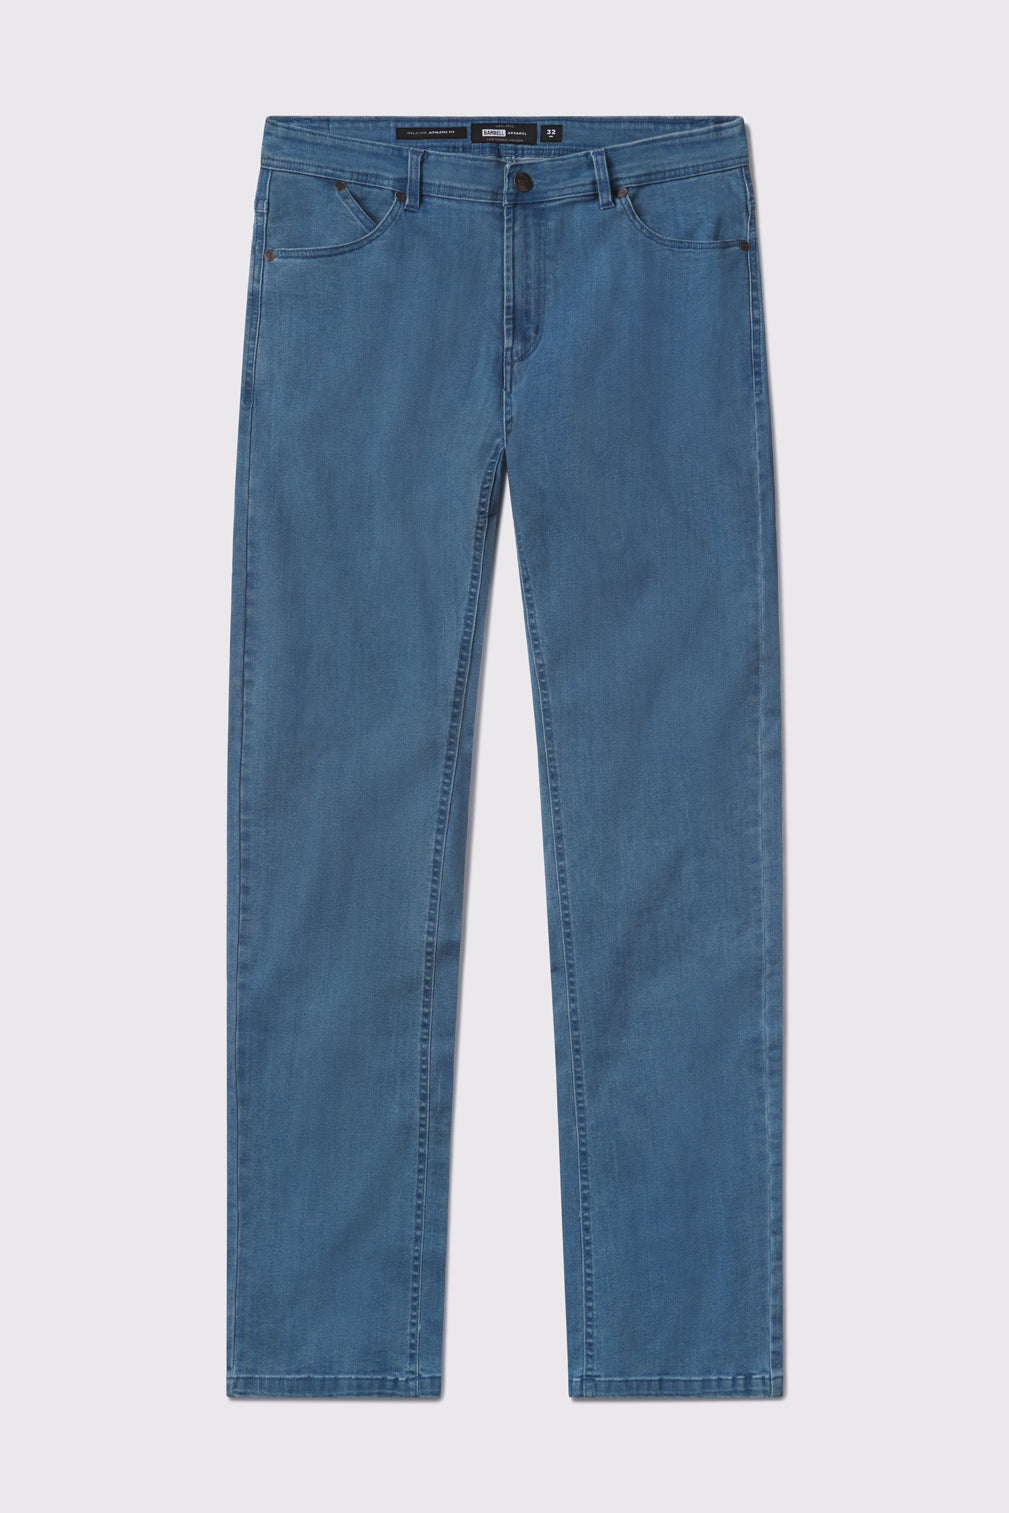 Mens Relaxed Athletic Fit Jeans 2.0 -Light Wash - photo from front flat lay #color_light-wash